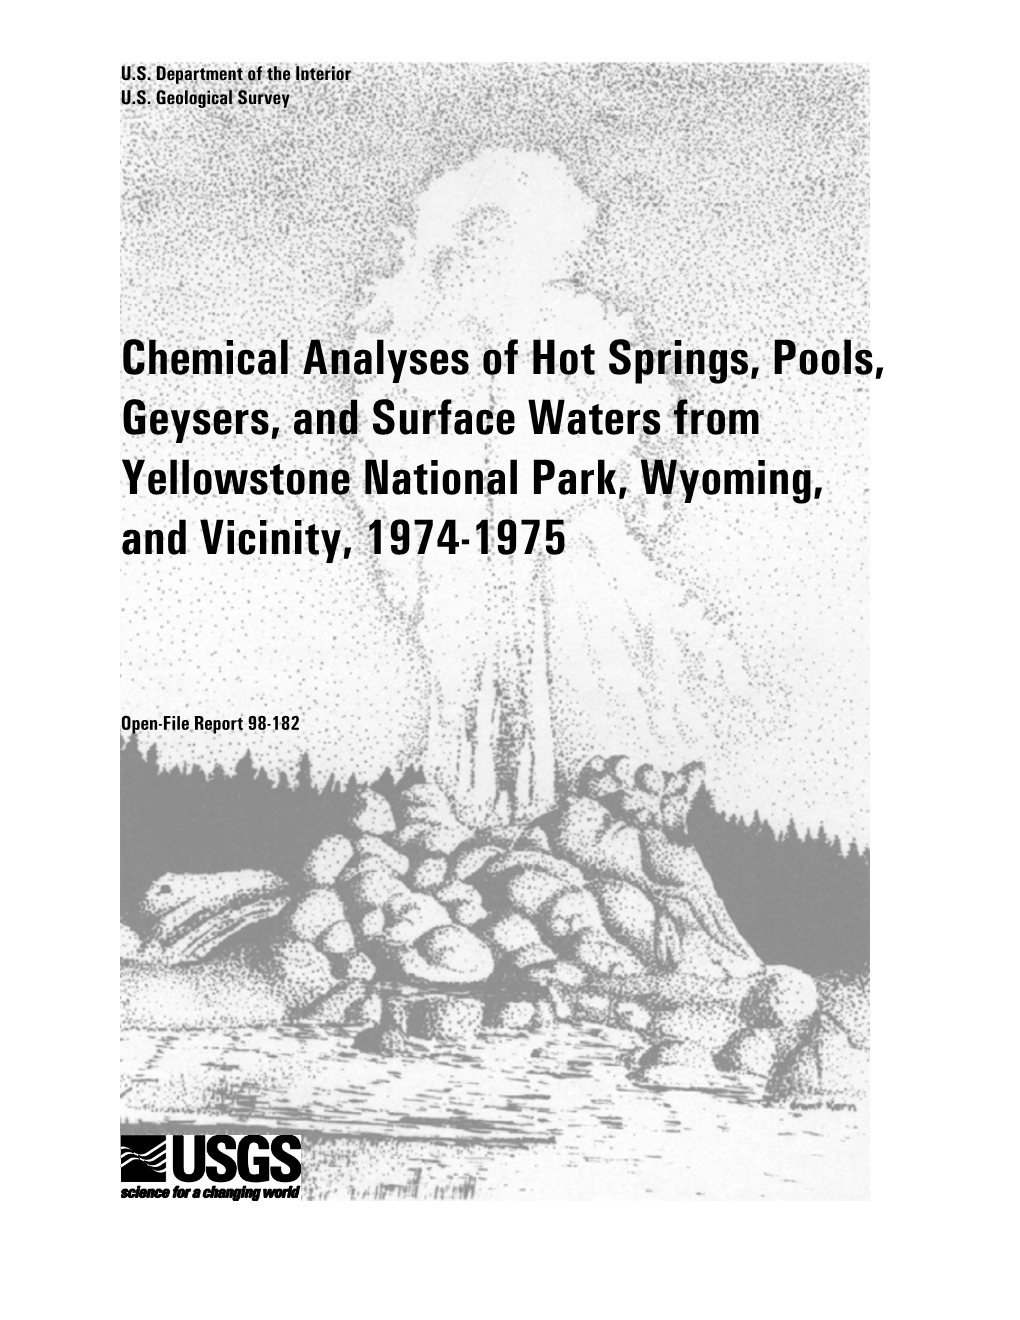 Chemical Analyses of Hot Springs, Pools, Geysers, and Surface Waters from Yellowstone National Park, Wyoming, and Vicinity, 1974-1975